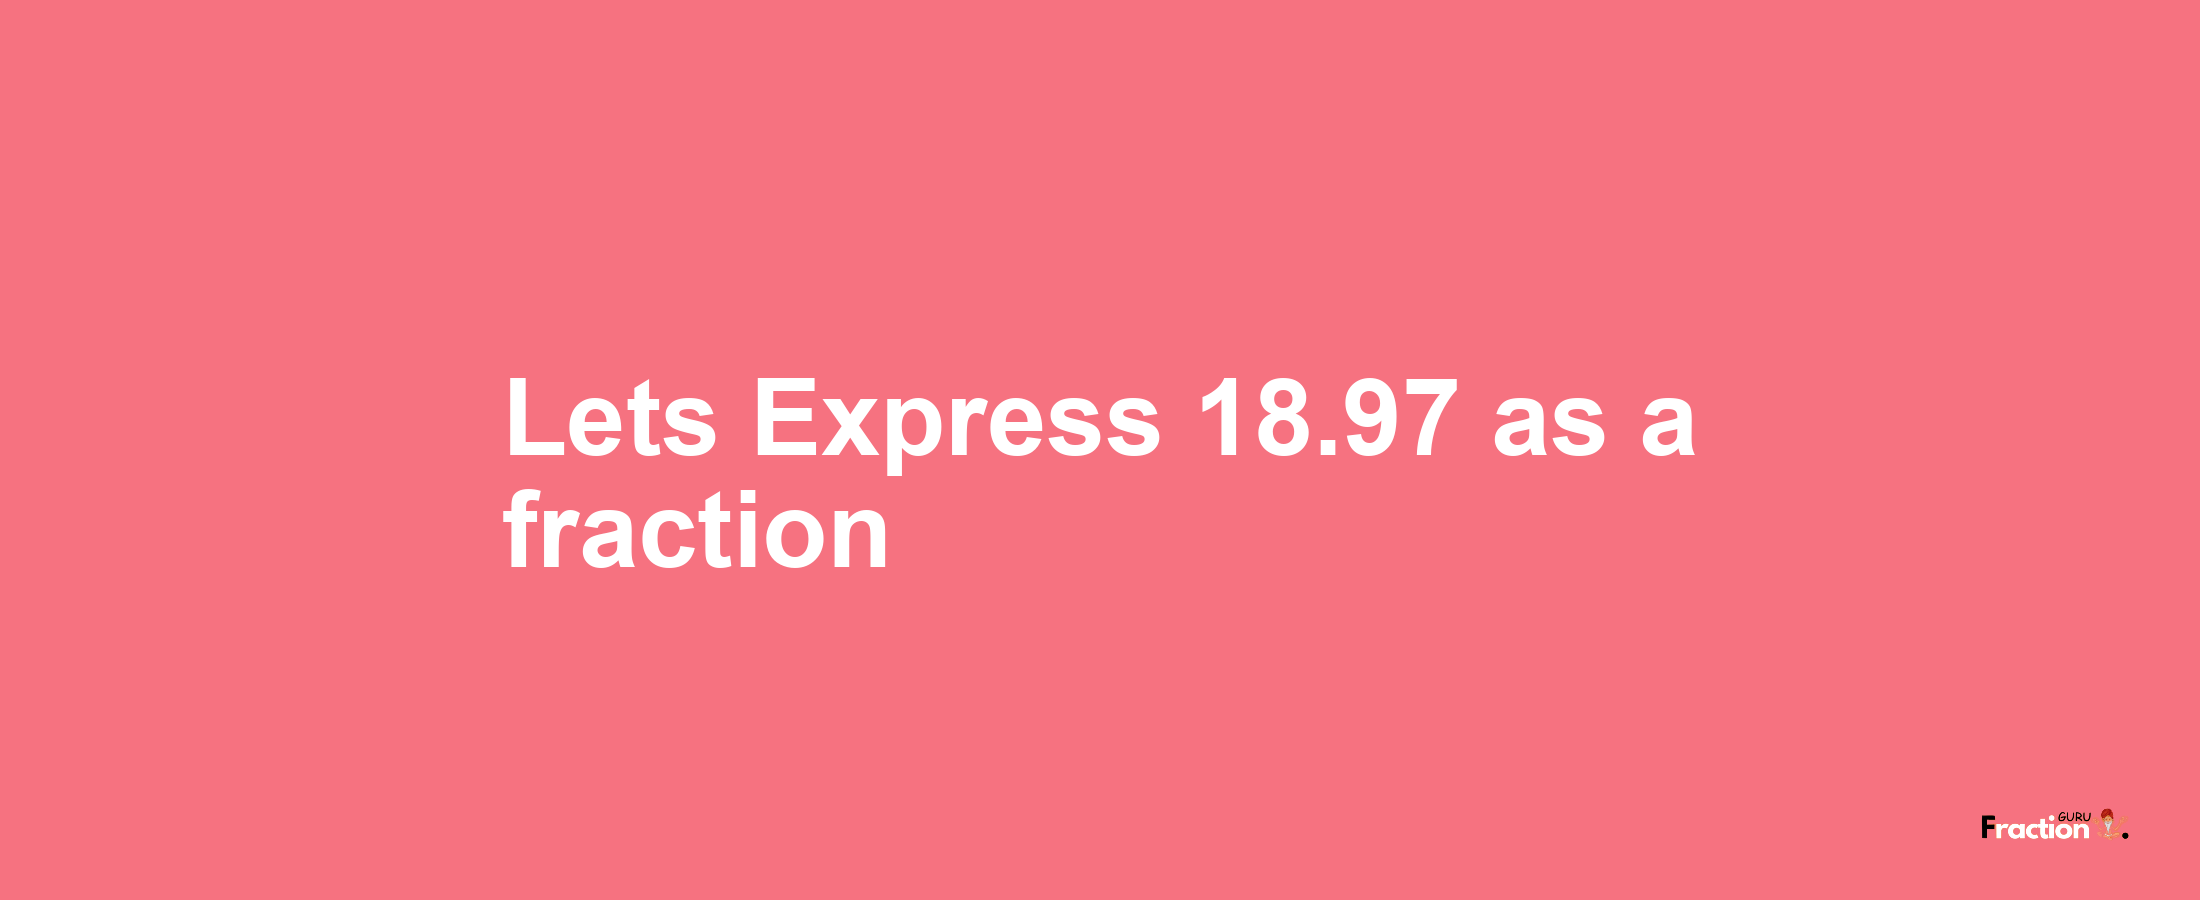 Lets Express 18.97 as afraction